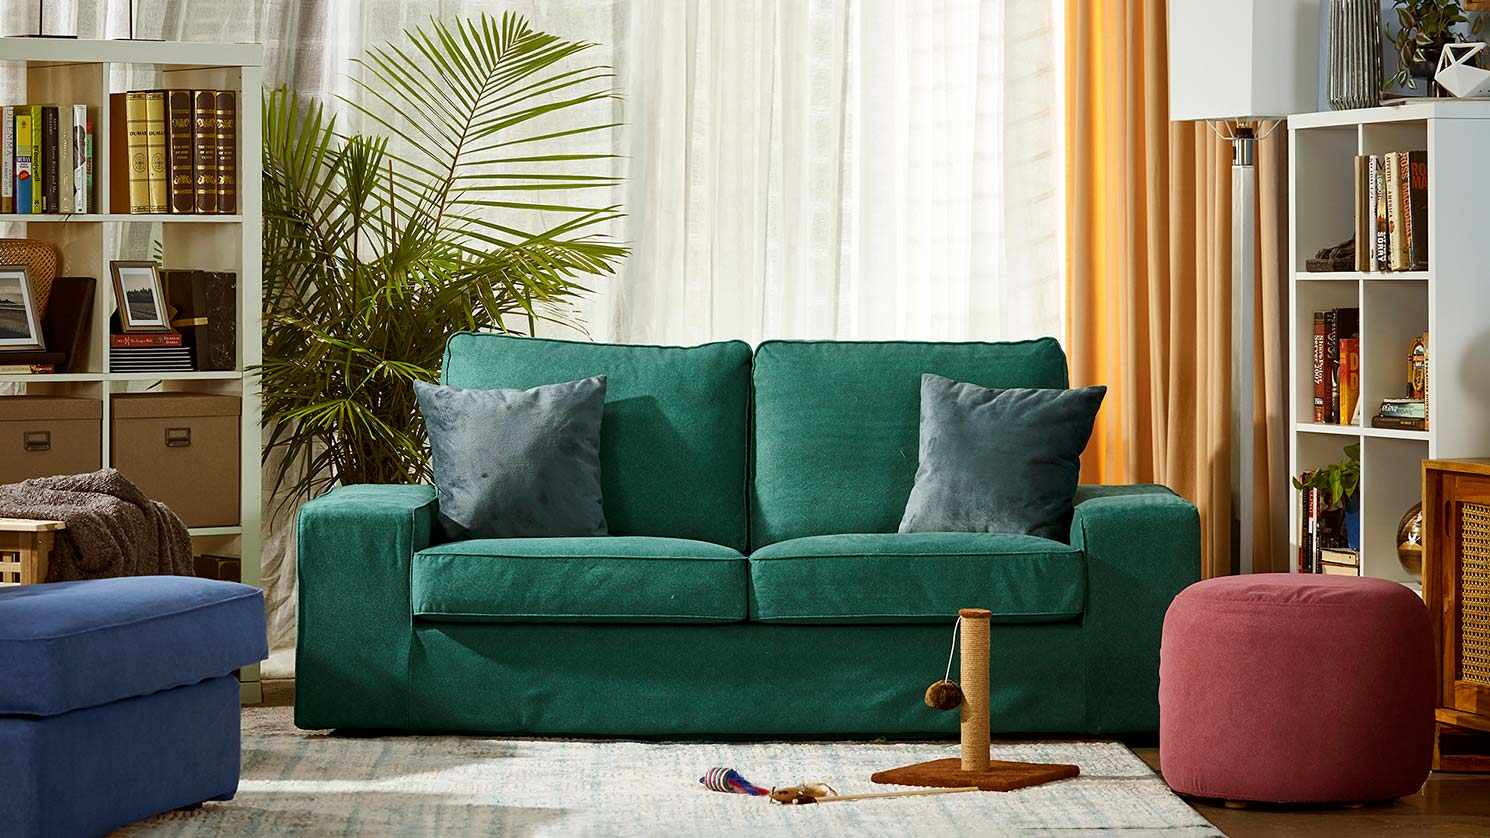 An IKEA Kivik sofa in a forest green Classic Velvet cover in a colourful family living room